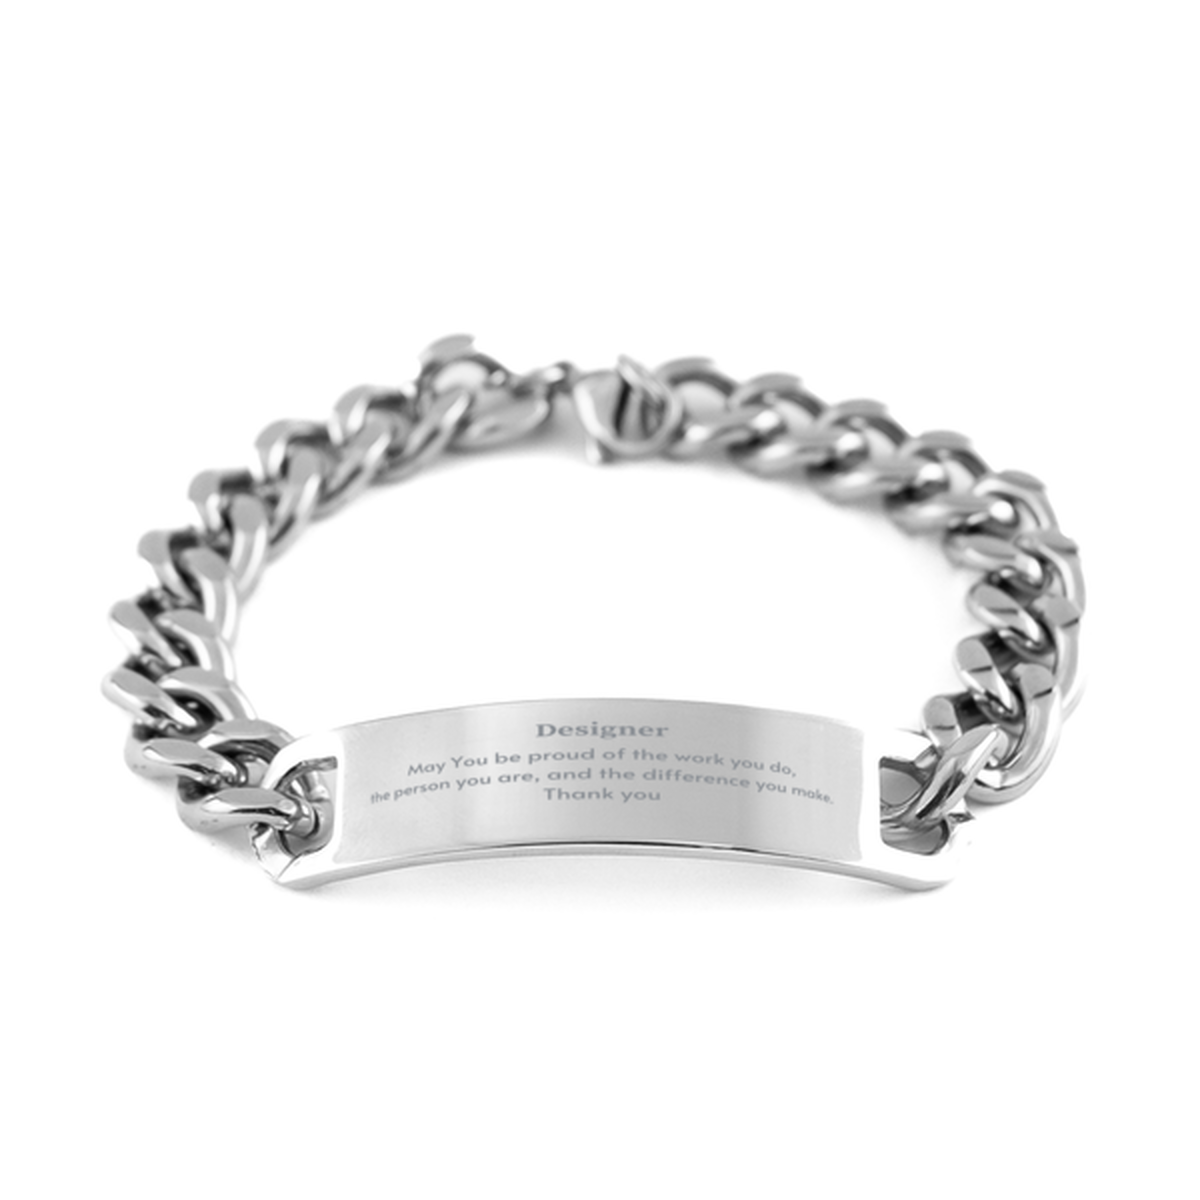 Heartwarming Cuban Chain Stainless Steel Bracelet Retirement Coworkers Gifts for Designer, Designer May You be proud of the work you do, the person you are Gifts for Boss Men Women Friends